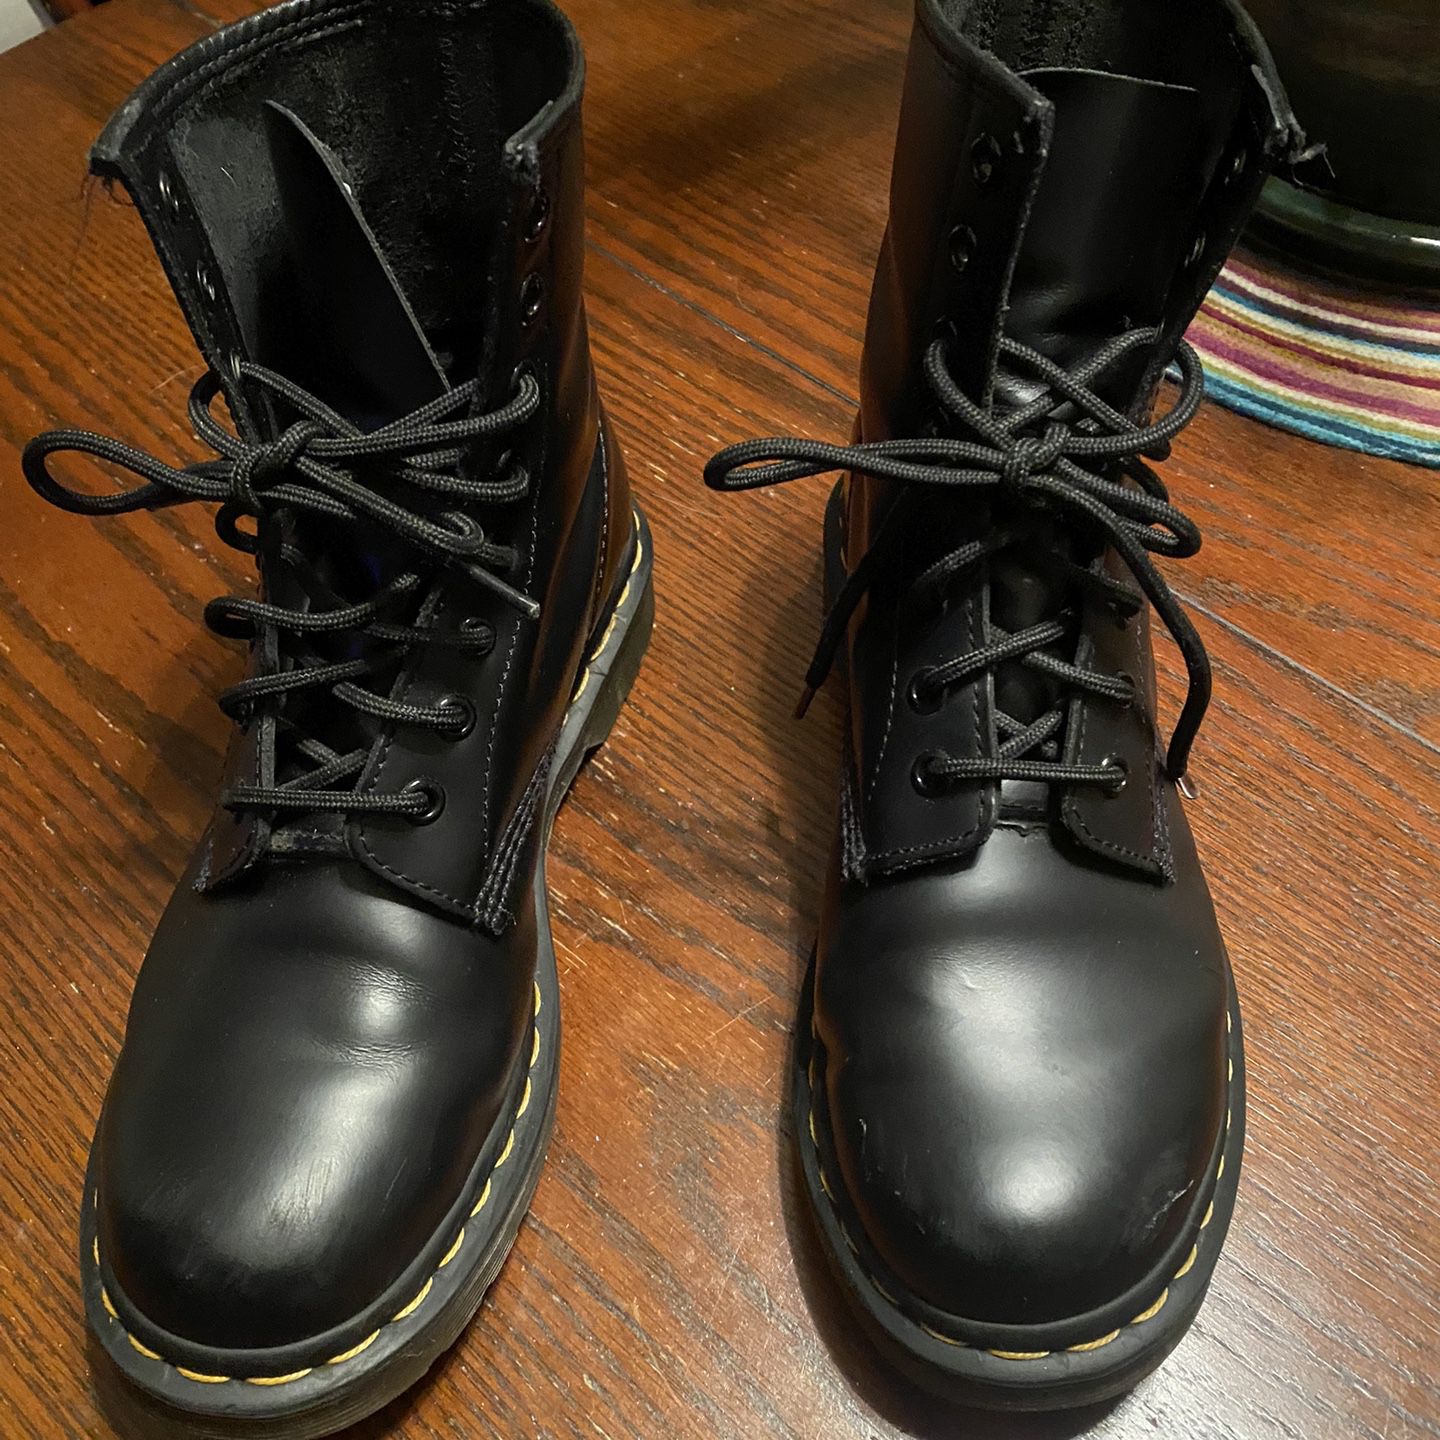 Dr Martin Boots 